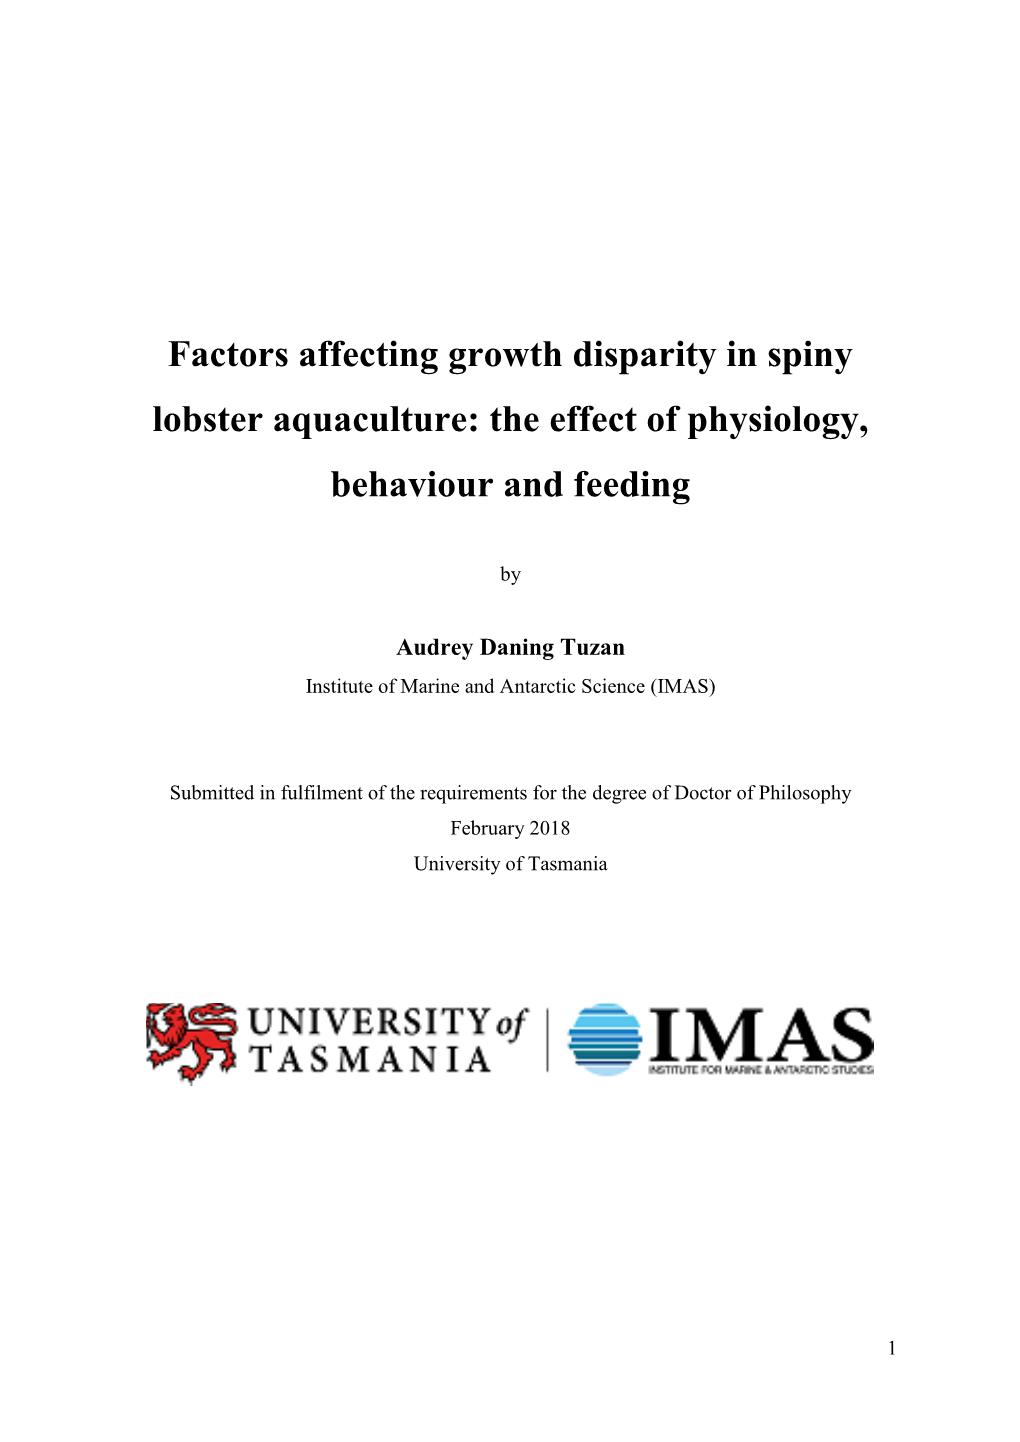 Factors Affecting Growth Disparity in Spiny Lobster Aquaculture: the Effect of Physiology, Behaviour and Feeding